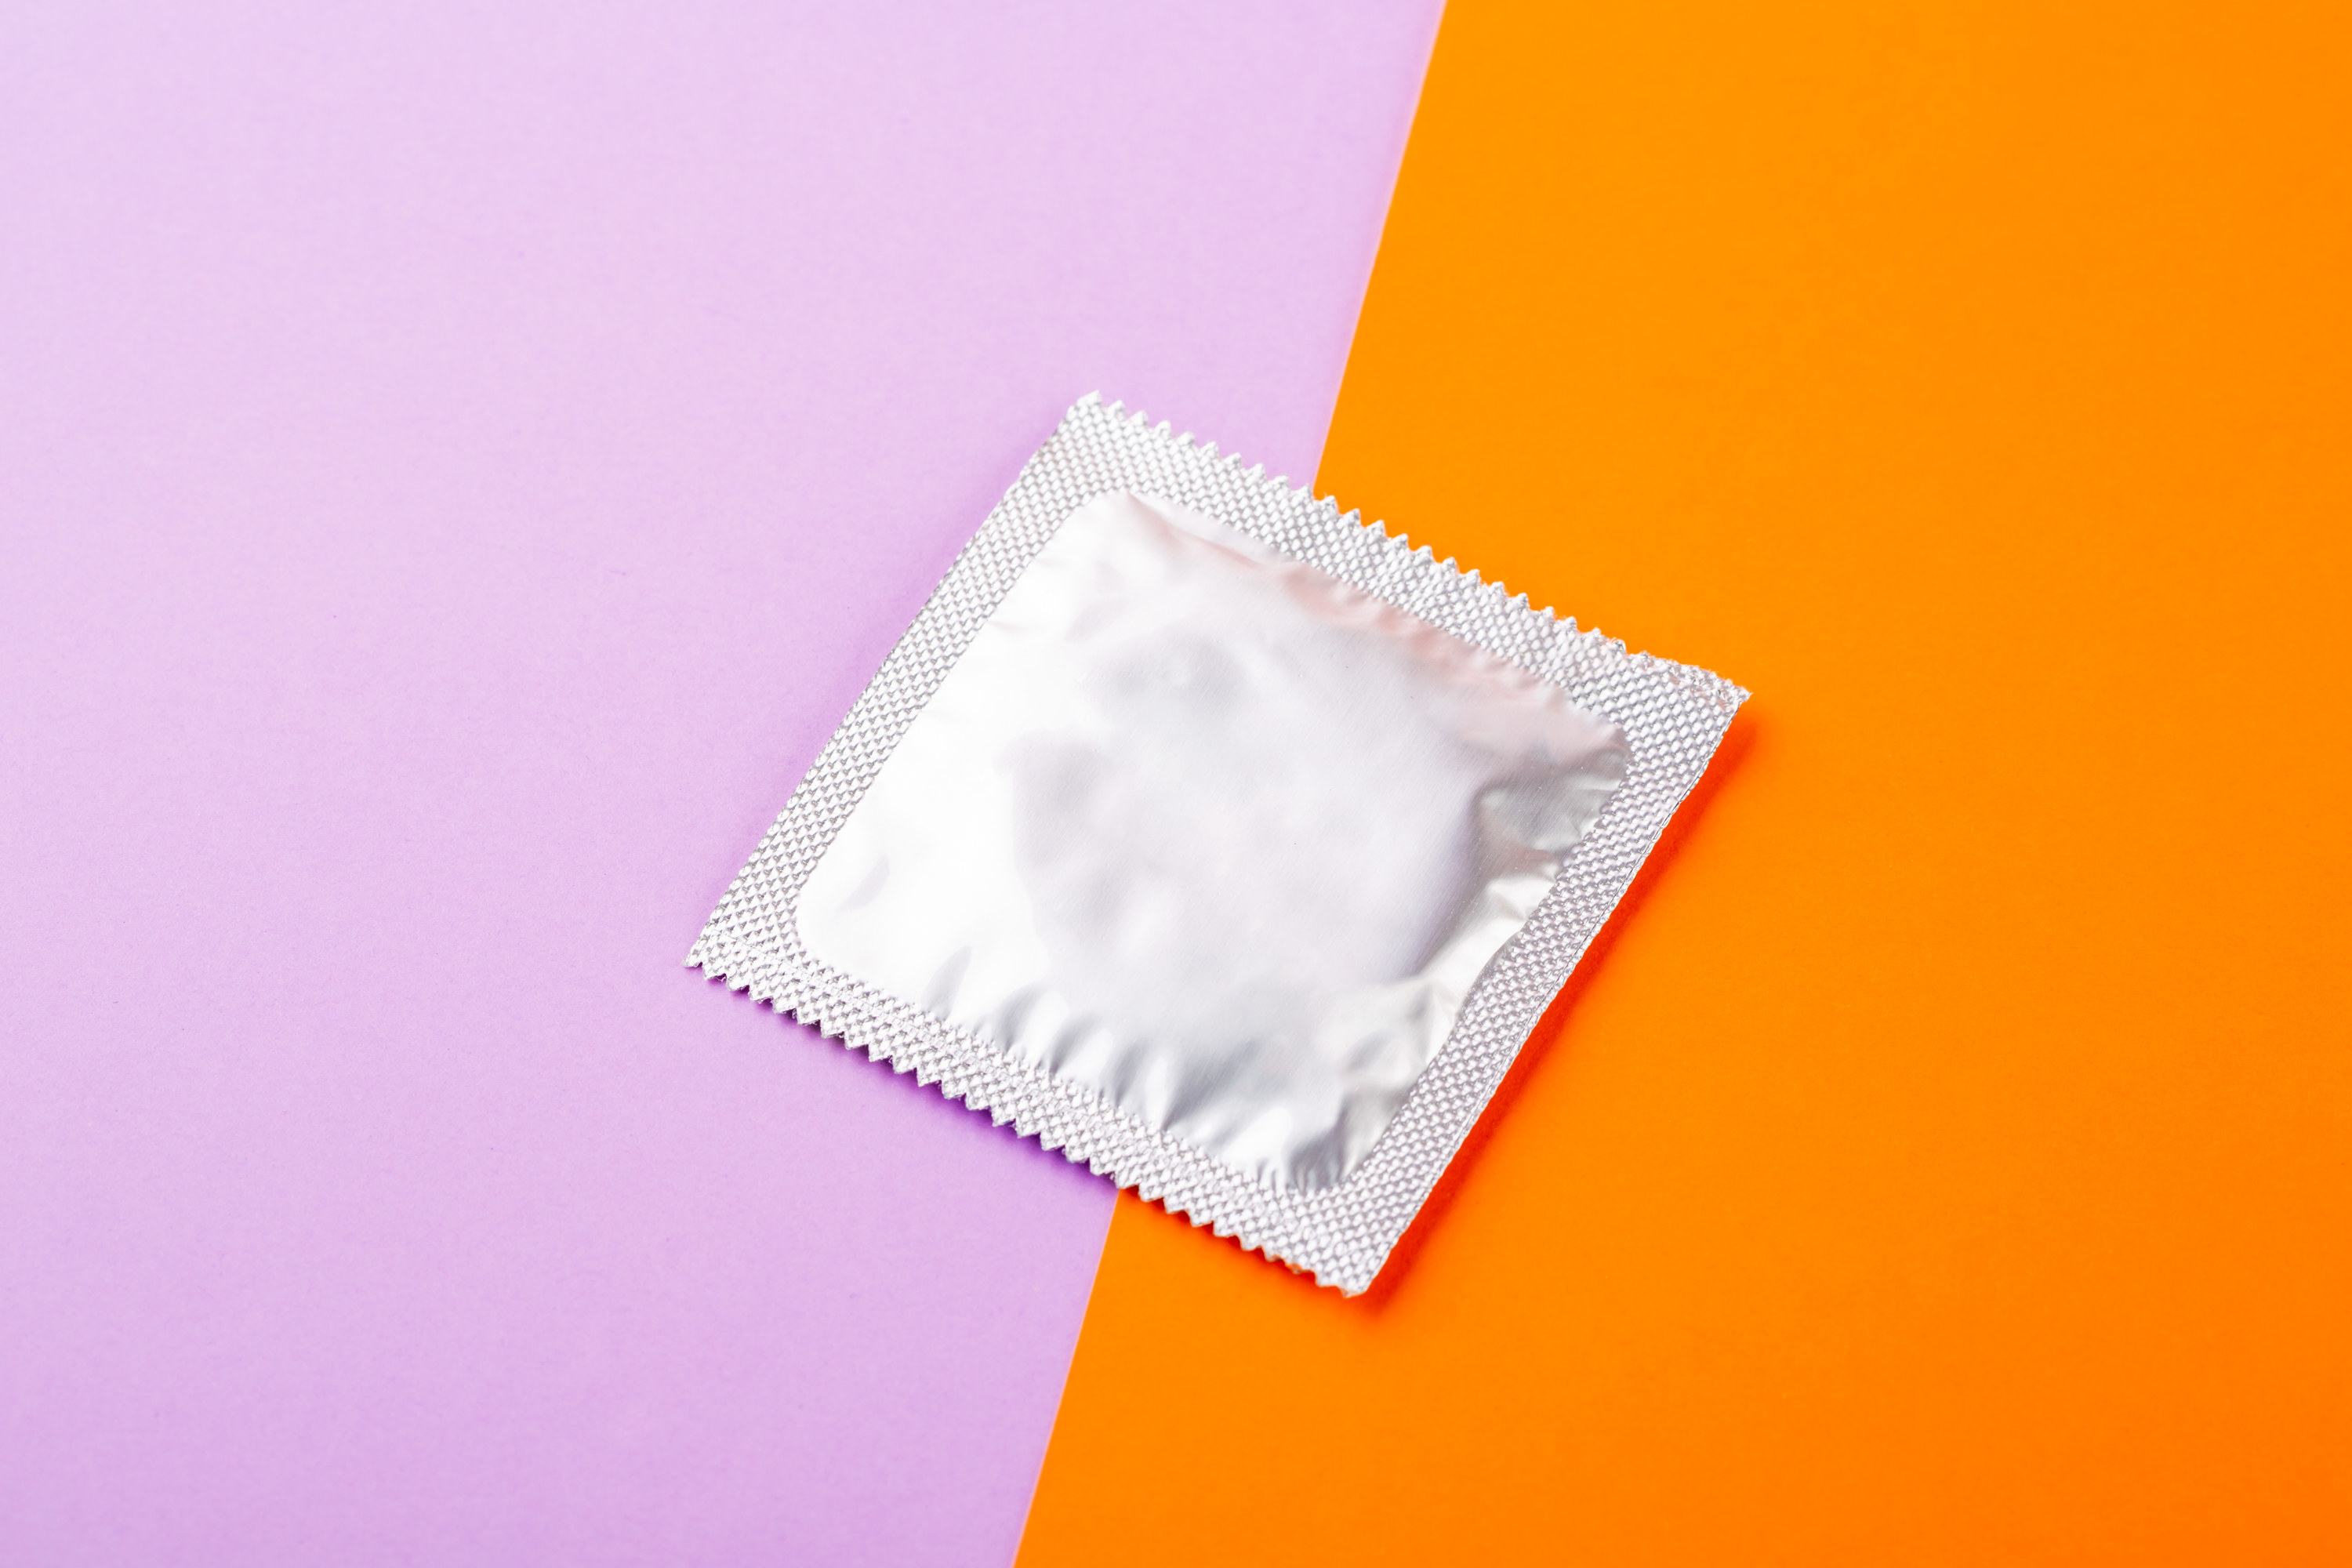 A condom wrapper against an orange and purple background